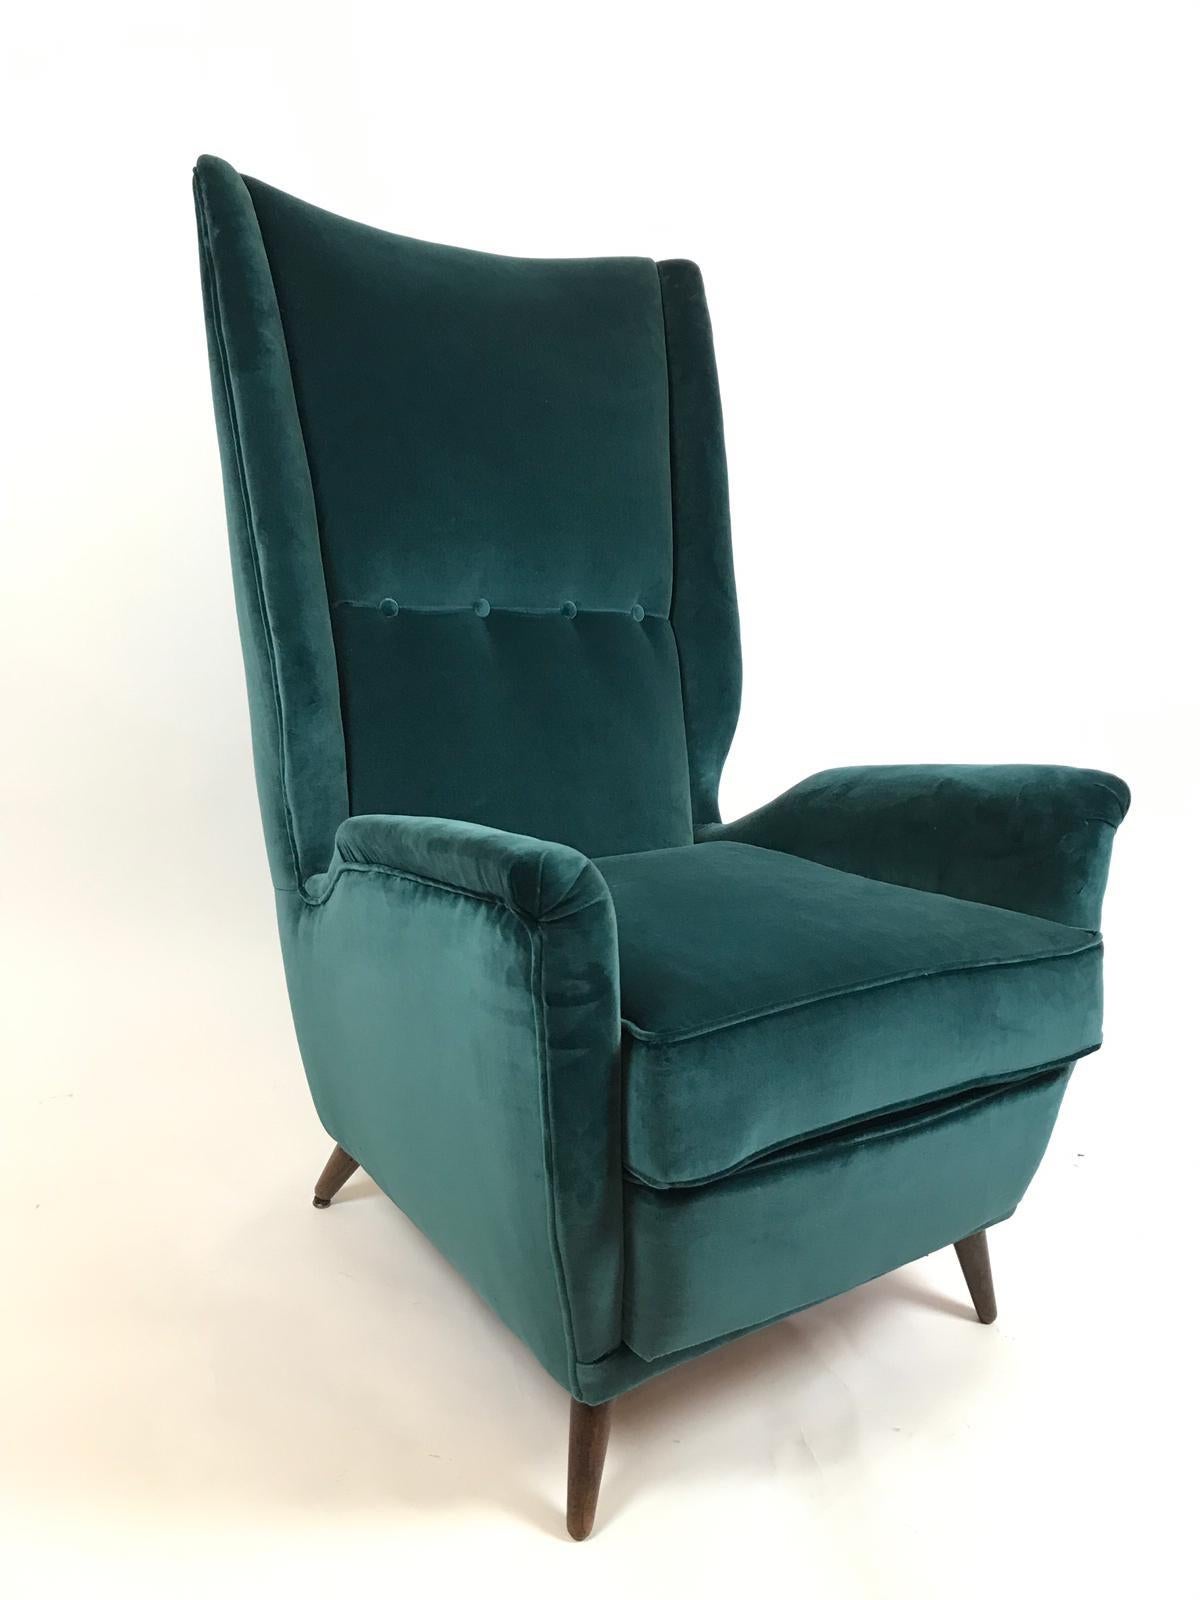 Mid-Century Modern Gio Ponti Pair of High Back Armchairs Newly Upholstered in Teal Velvet